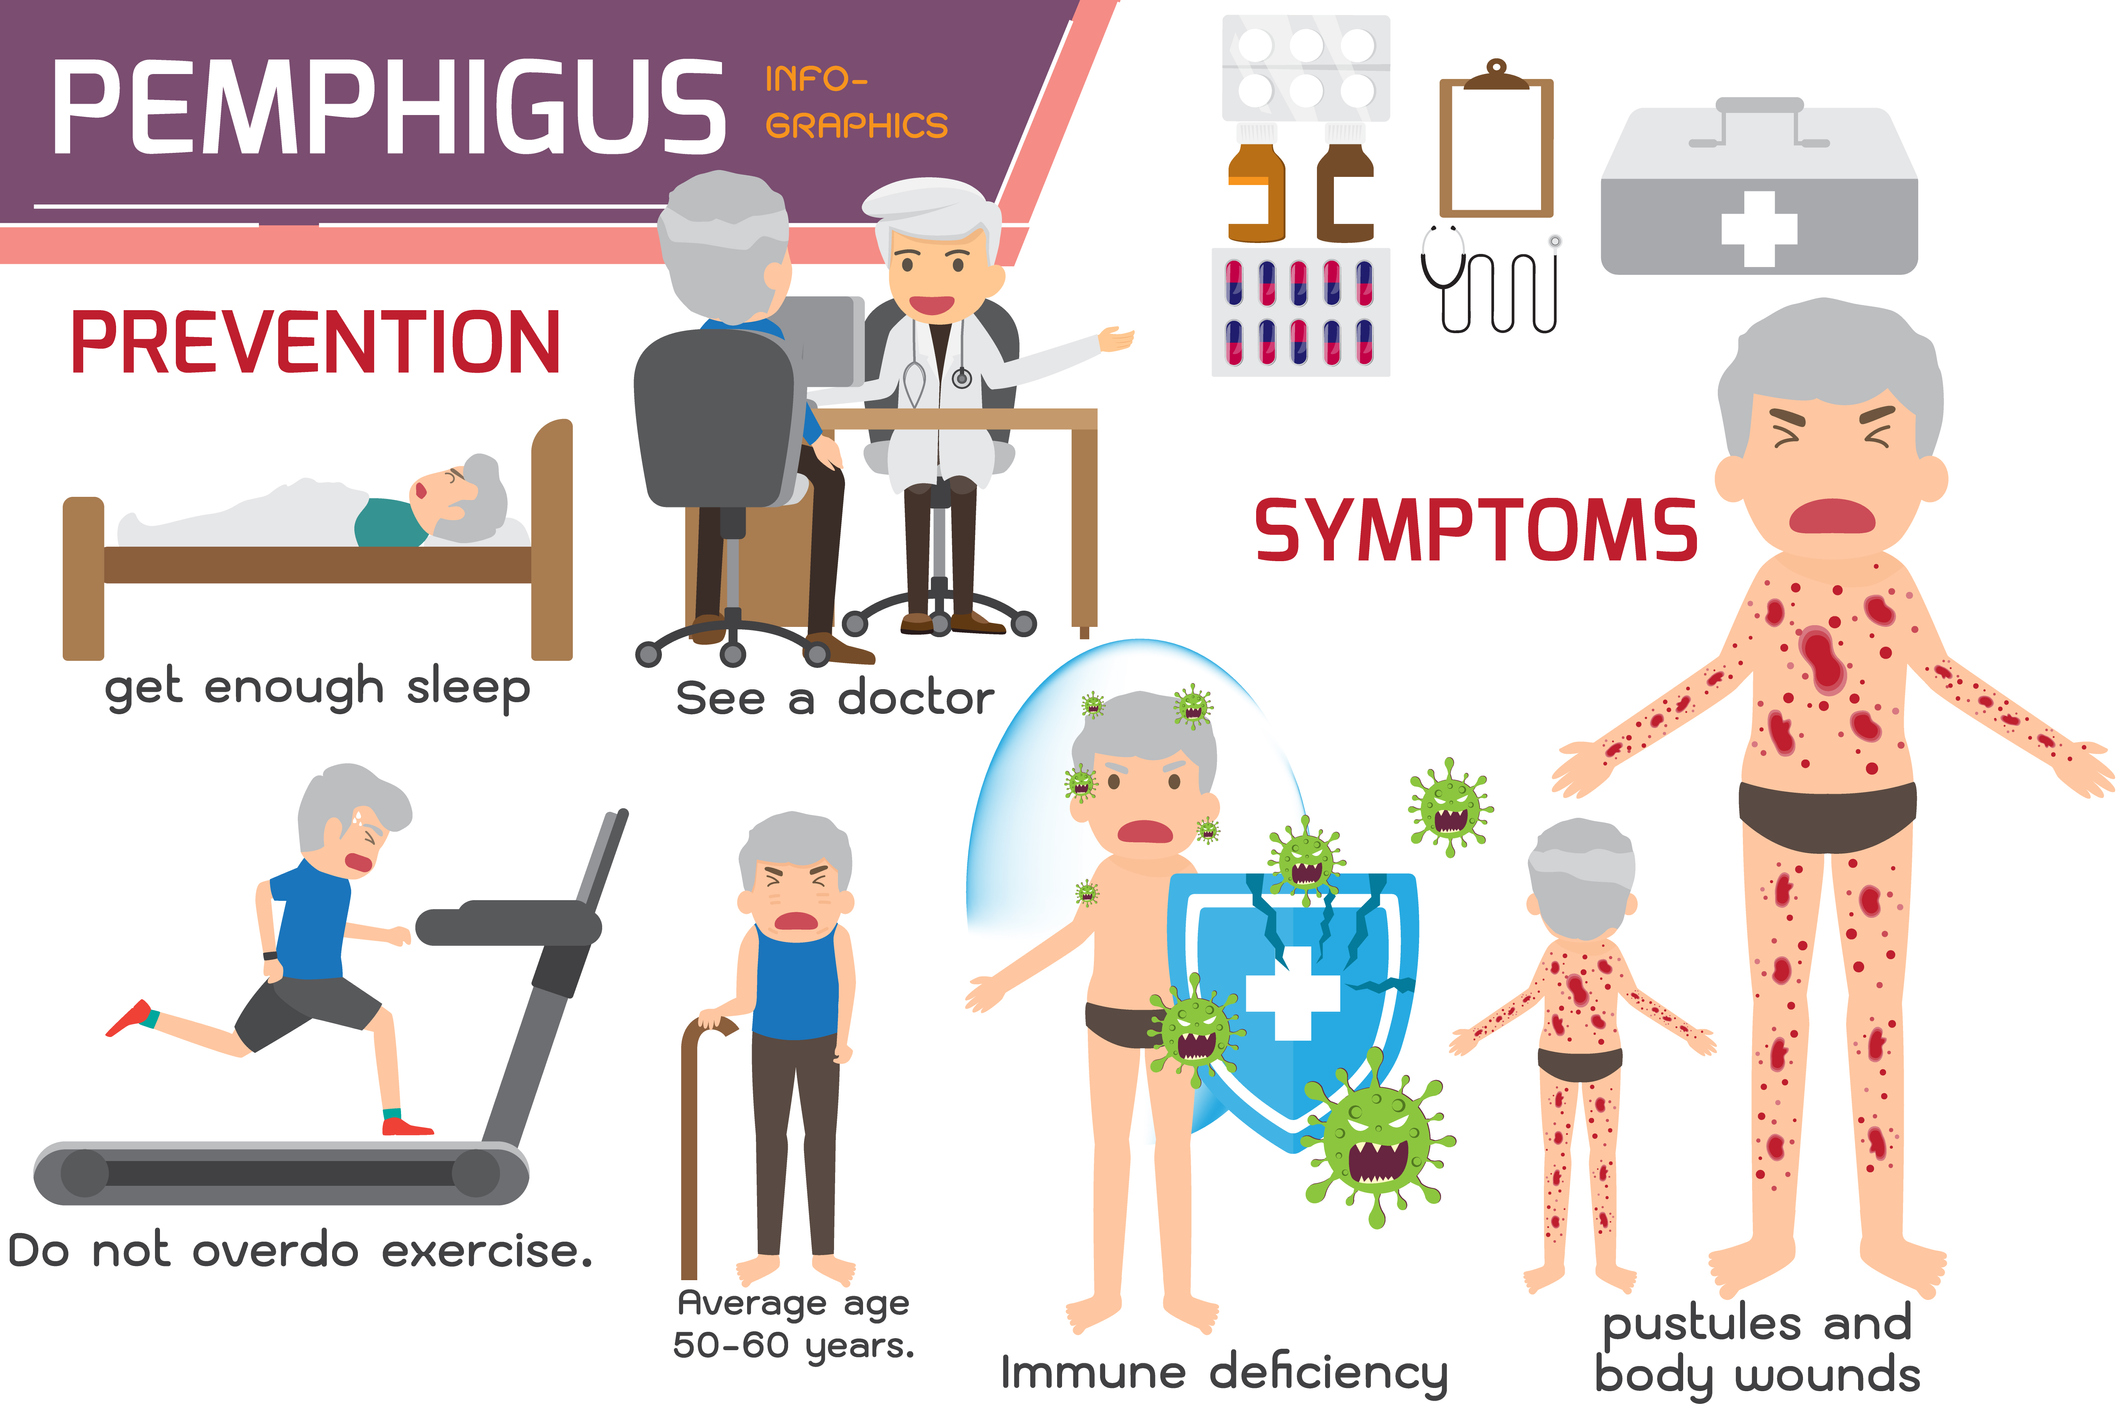 Symptoms and prevention of pemphigus